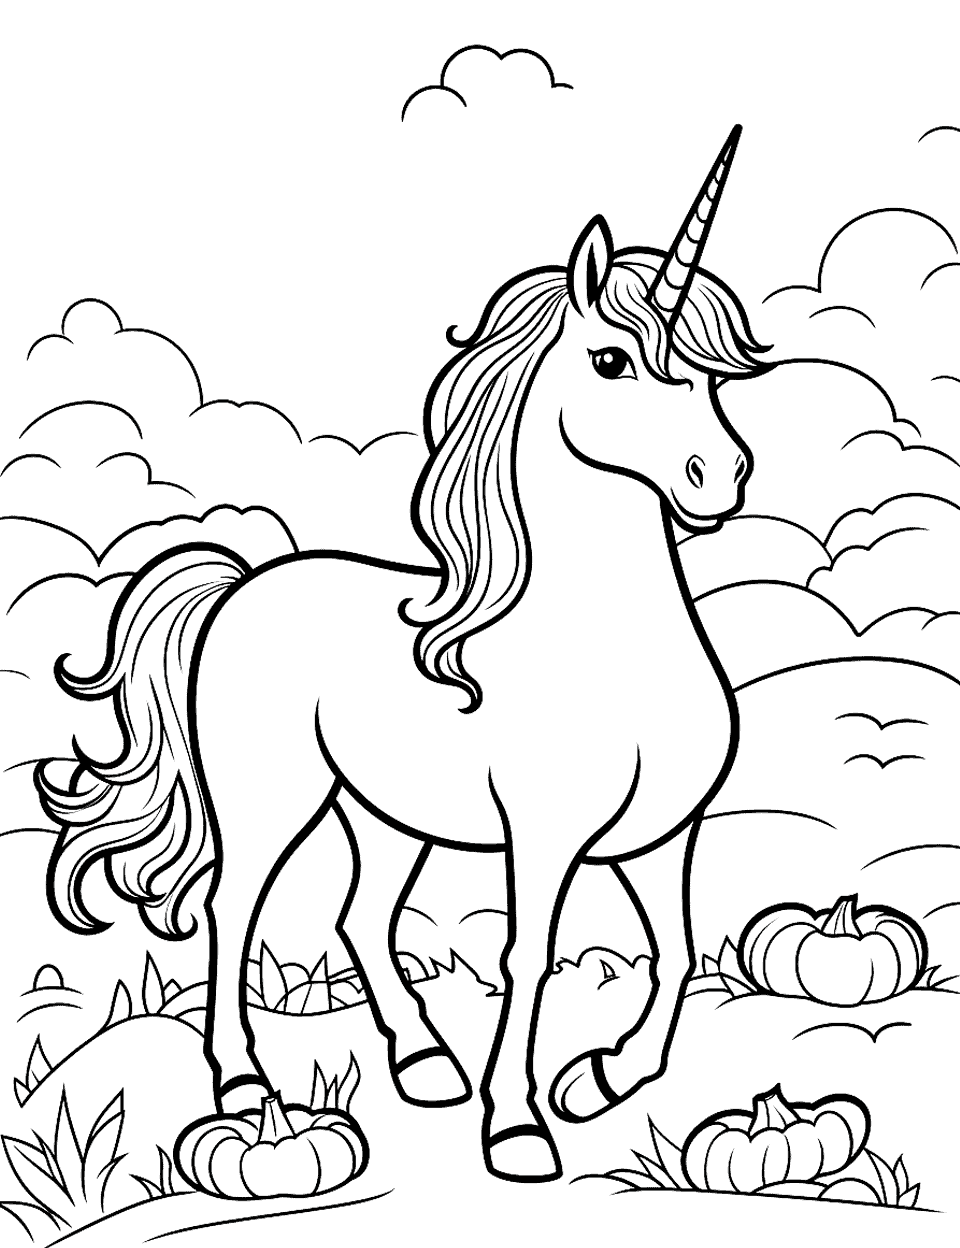 Unicorn and Pumpkin Patch Coloring Page - A unicorn exploring a pumpkin patch, perfect for a fall or Halloween-themed coloring page.